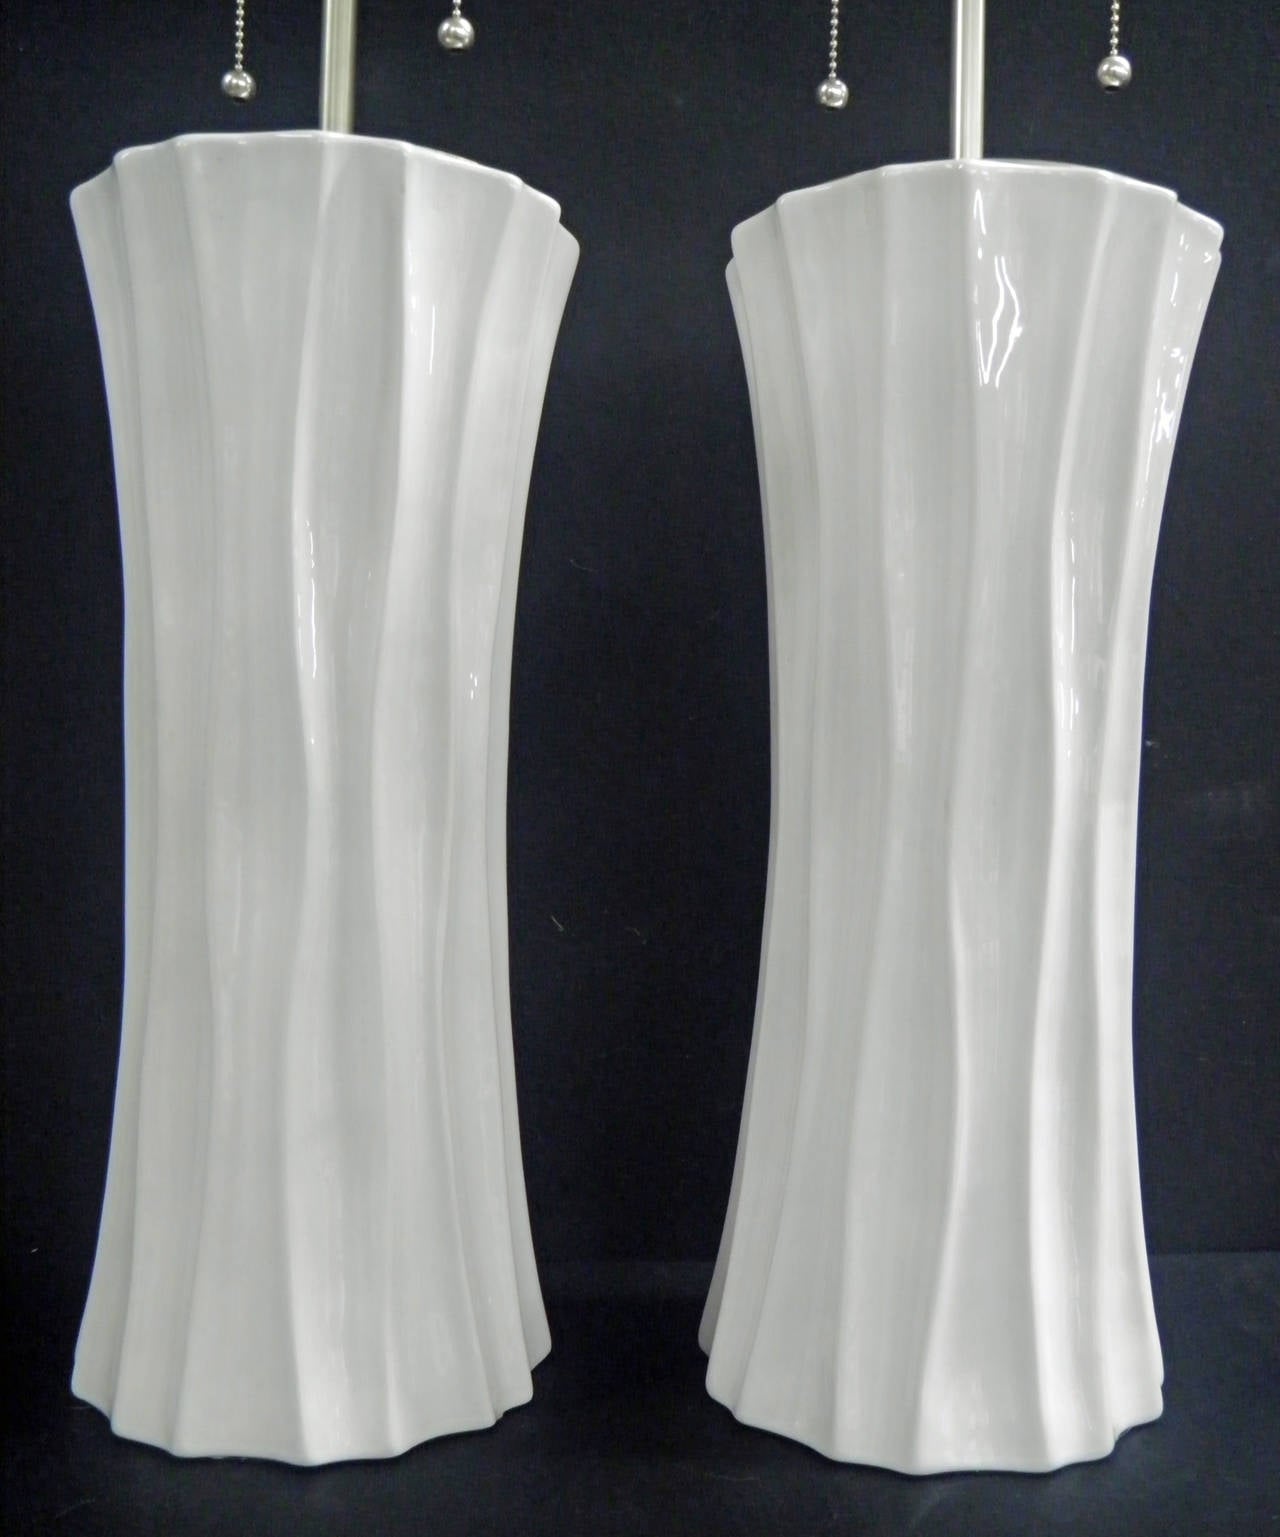 Pair of hand formed fluted ceramic, glazed column vases with lamp application. The vases are 16 1/4